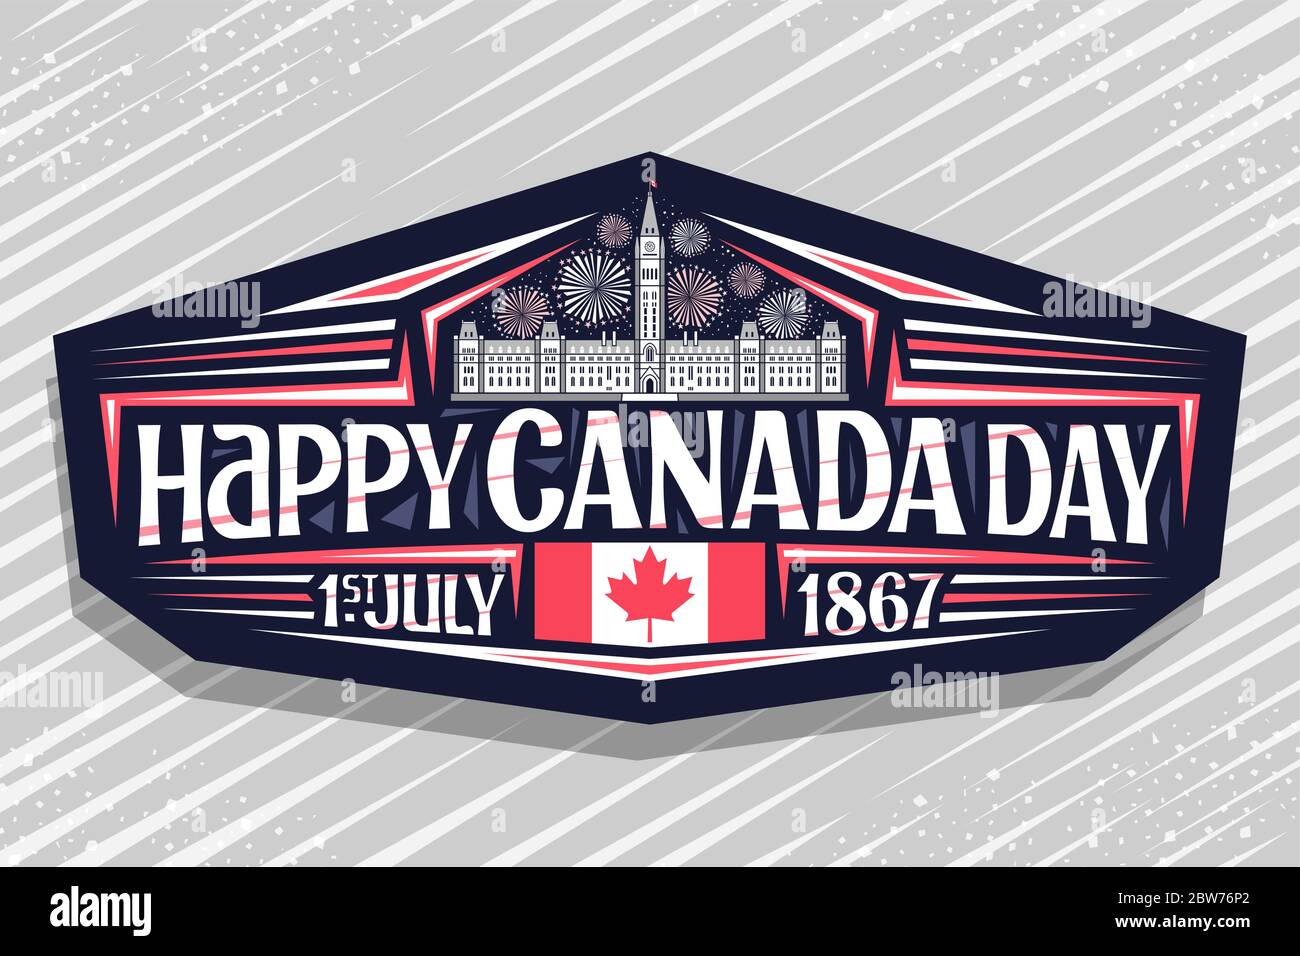 Vector logo for Canada Day, dark decorative signage with illustration of Parliament Hill in Ottawa and Canadian flag, unique letters for words happy c Stock Vector